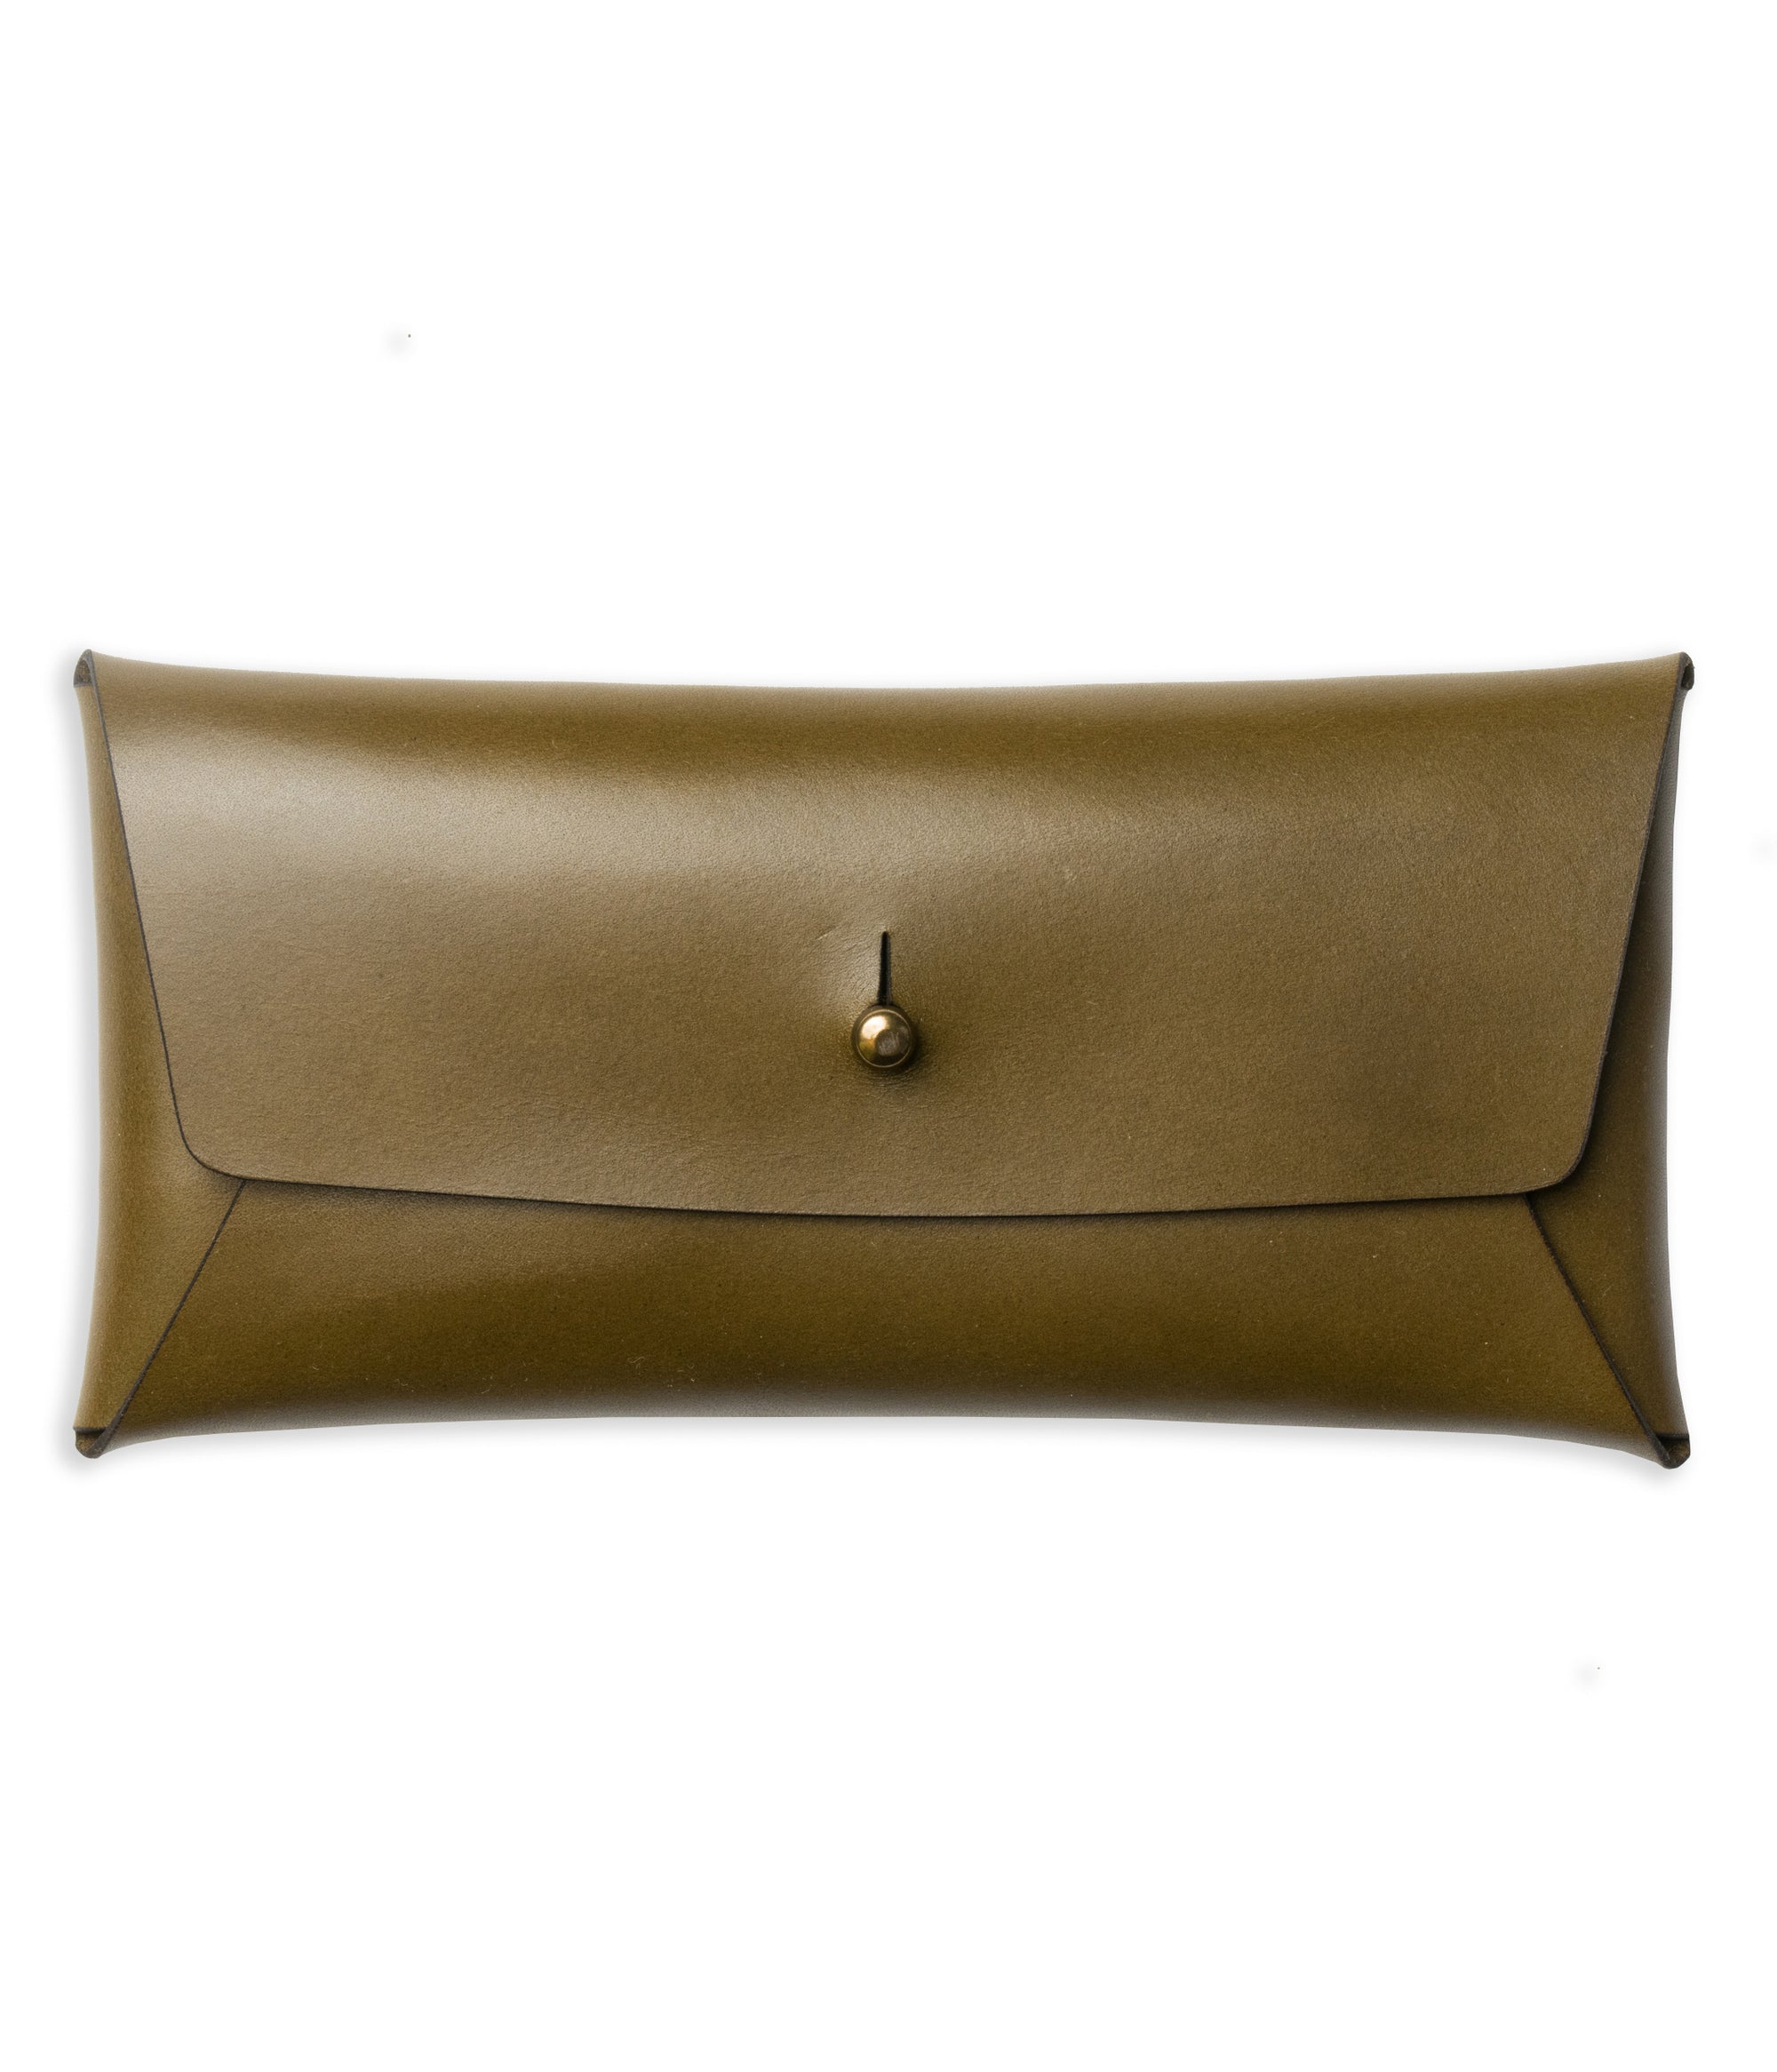 green leather folding card long wallet with brass stud closure